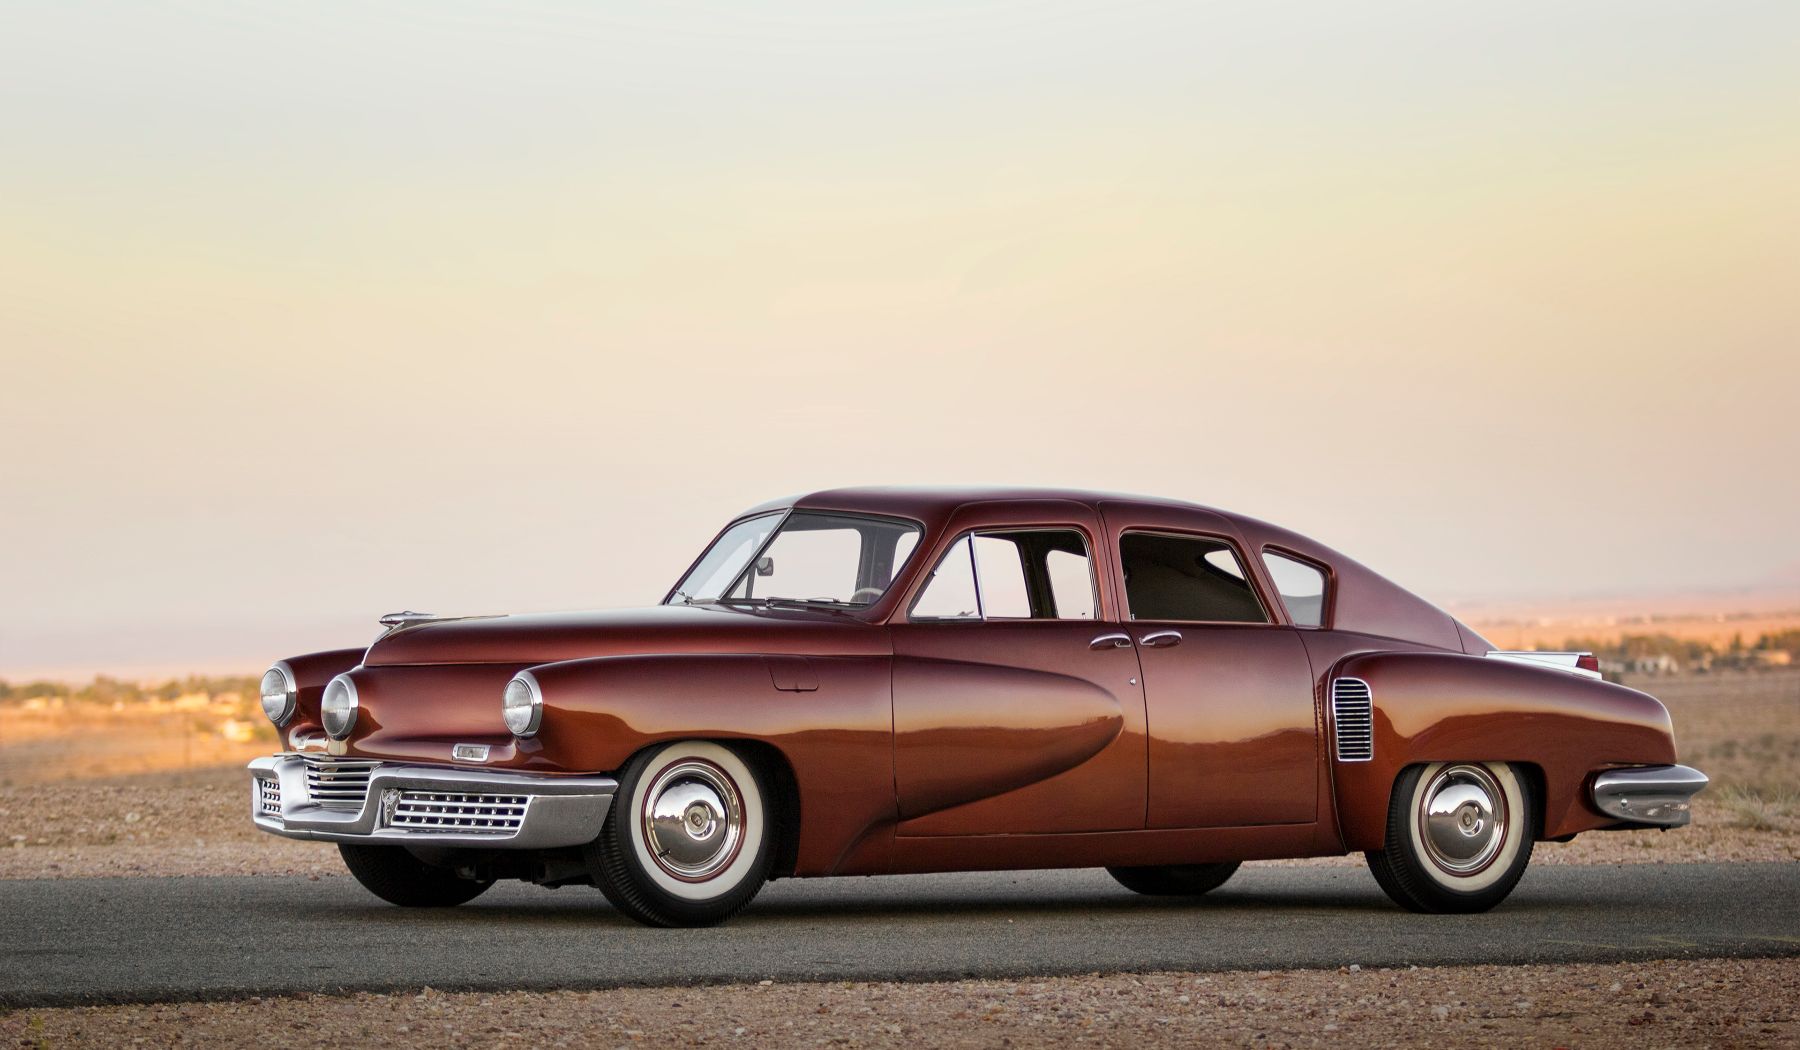 A 1948 Tucker Dominated the Barrett-Jackson Auction Over the Weekend